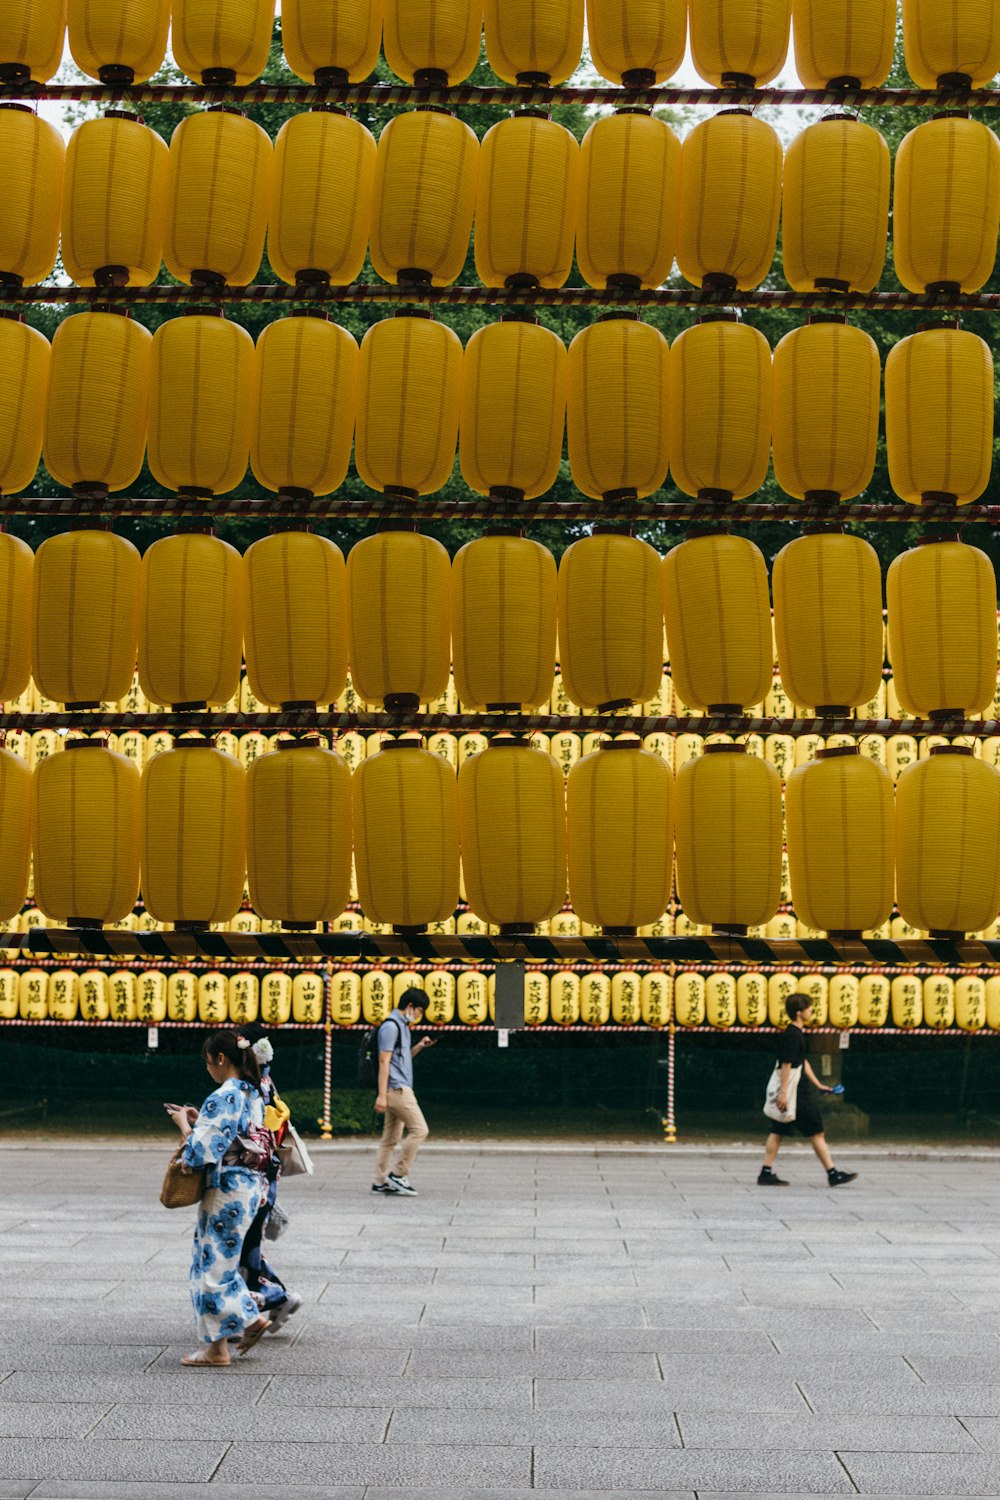 a group of people walking down a street next to a yellow wall